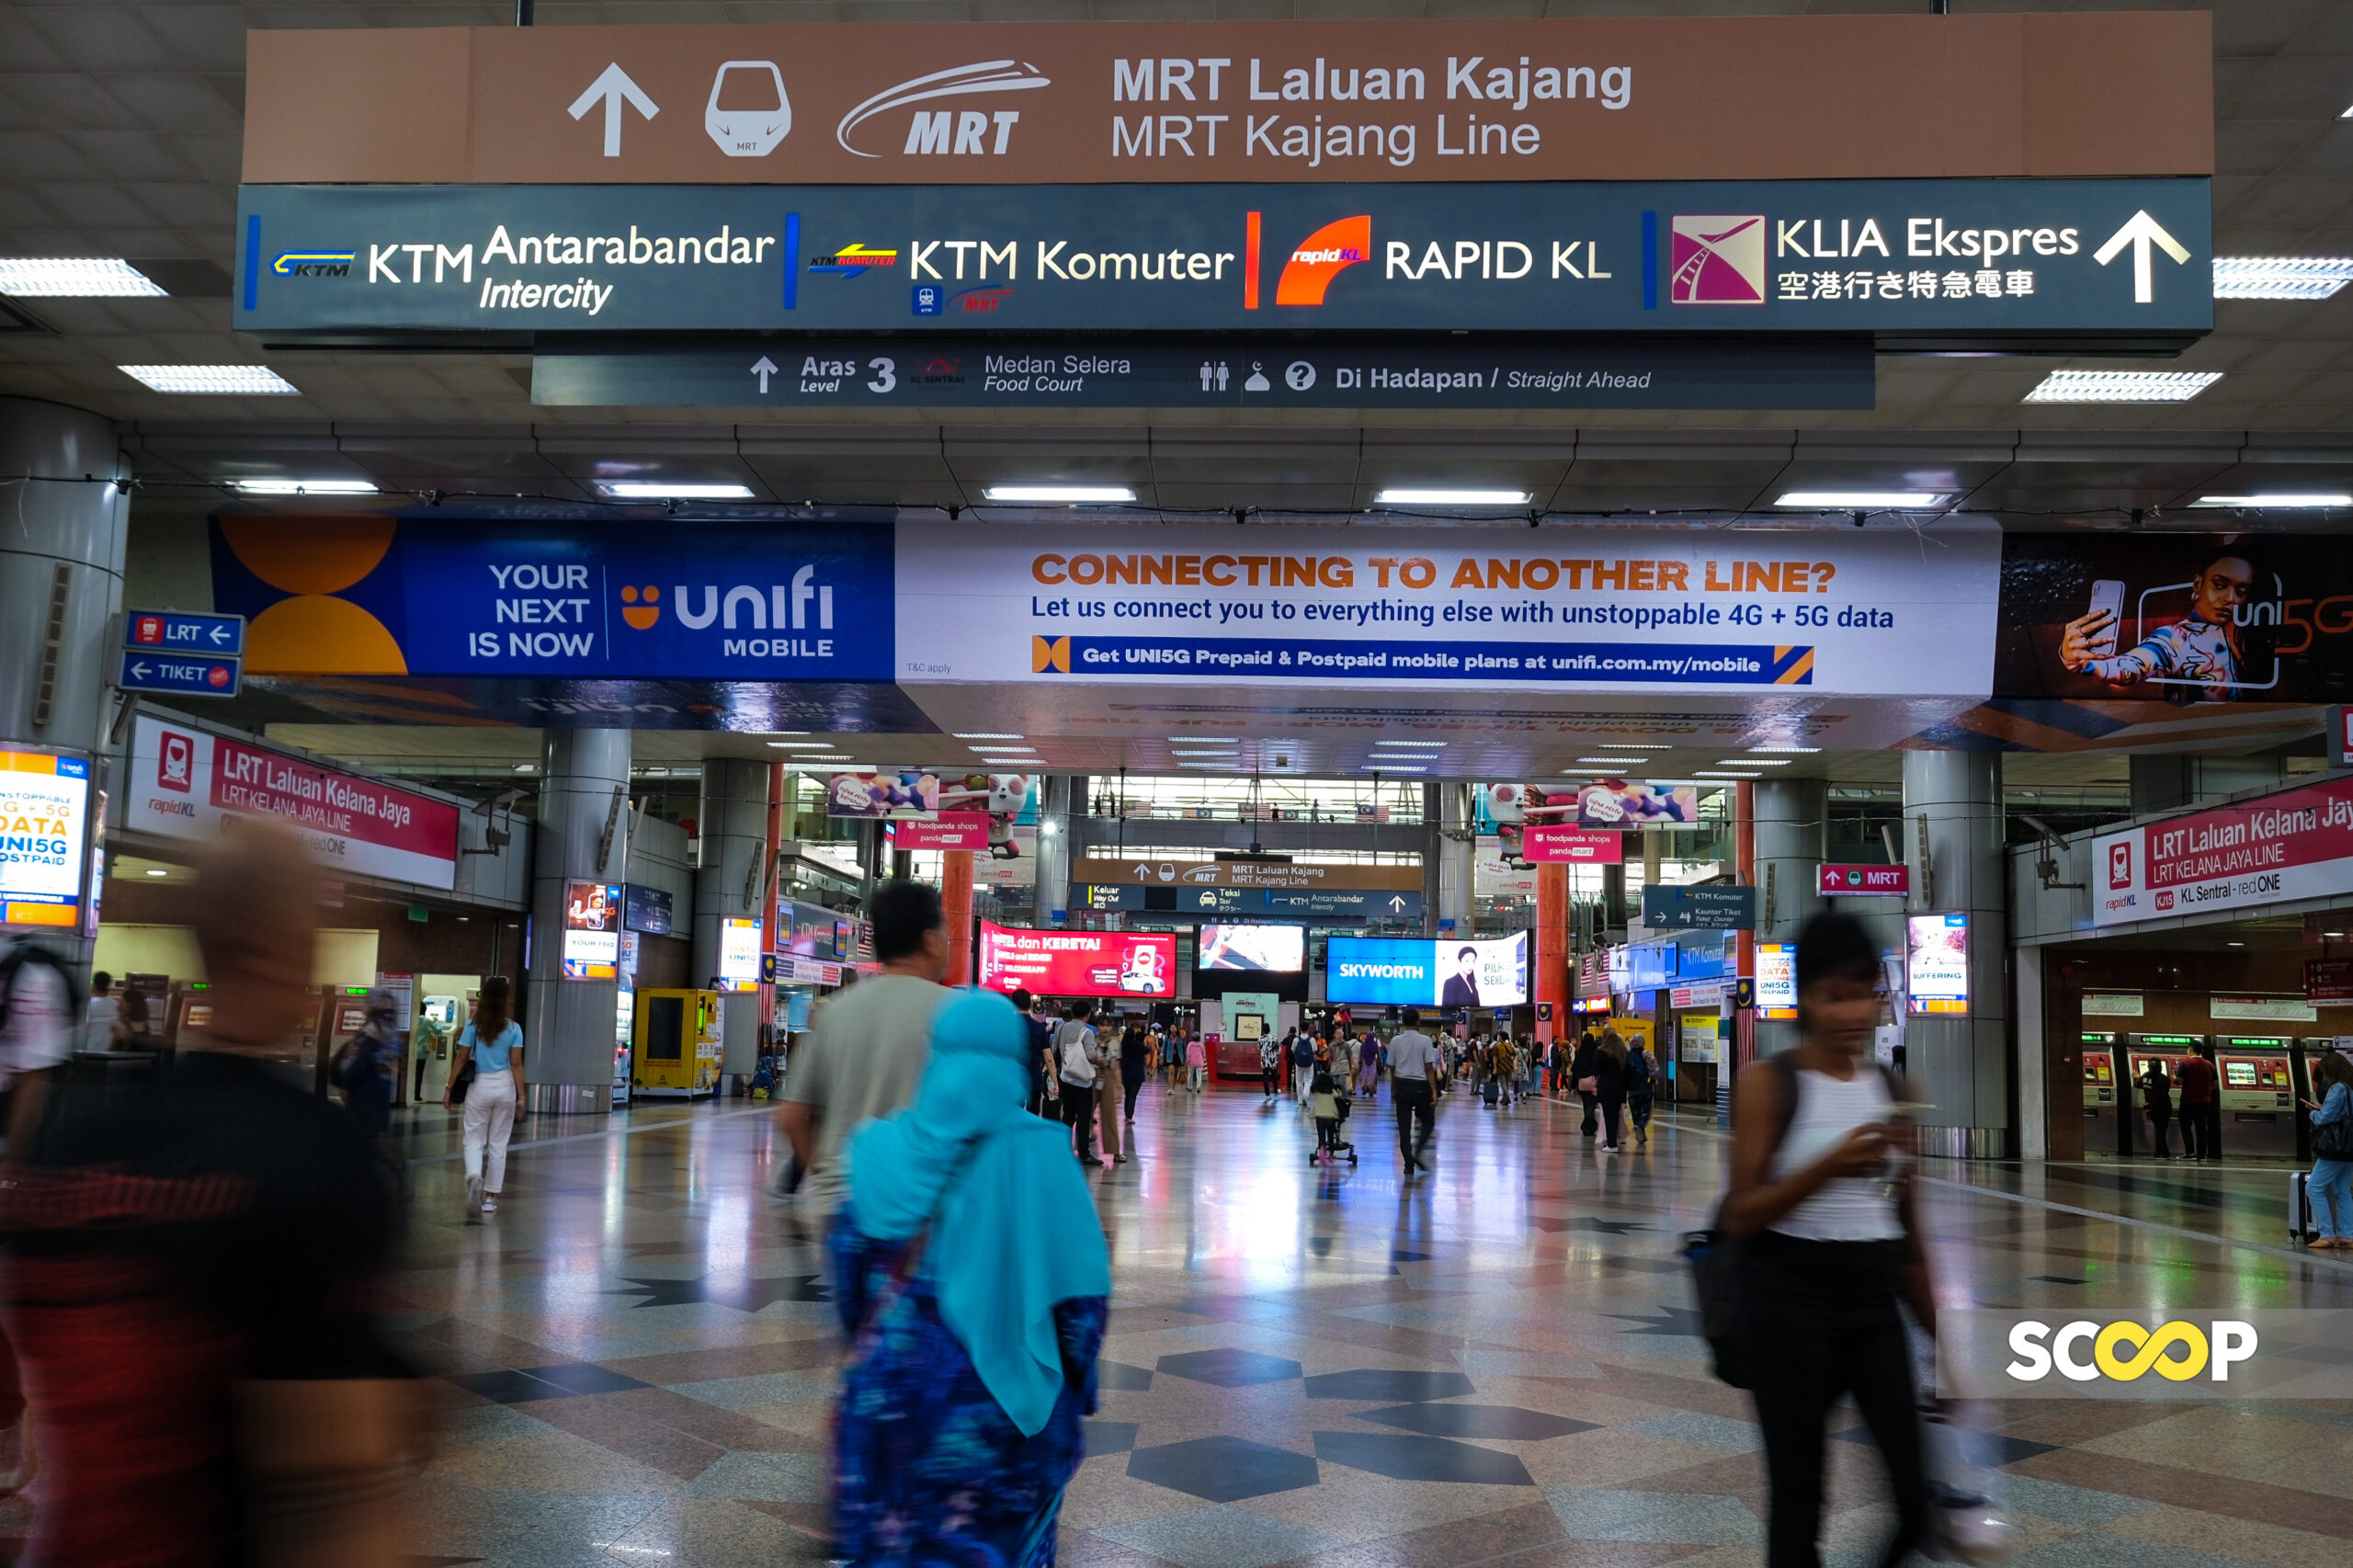 MoT, MRCB to work together to redevelop KL Sentral, project to start year-end